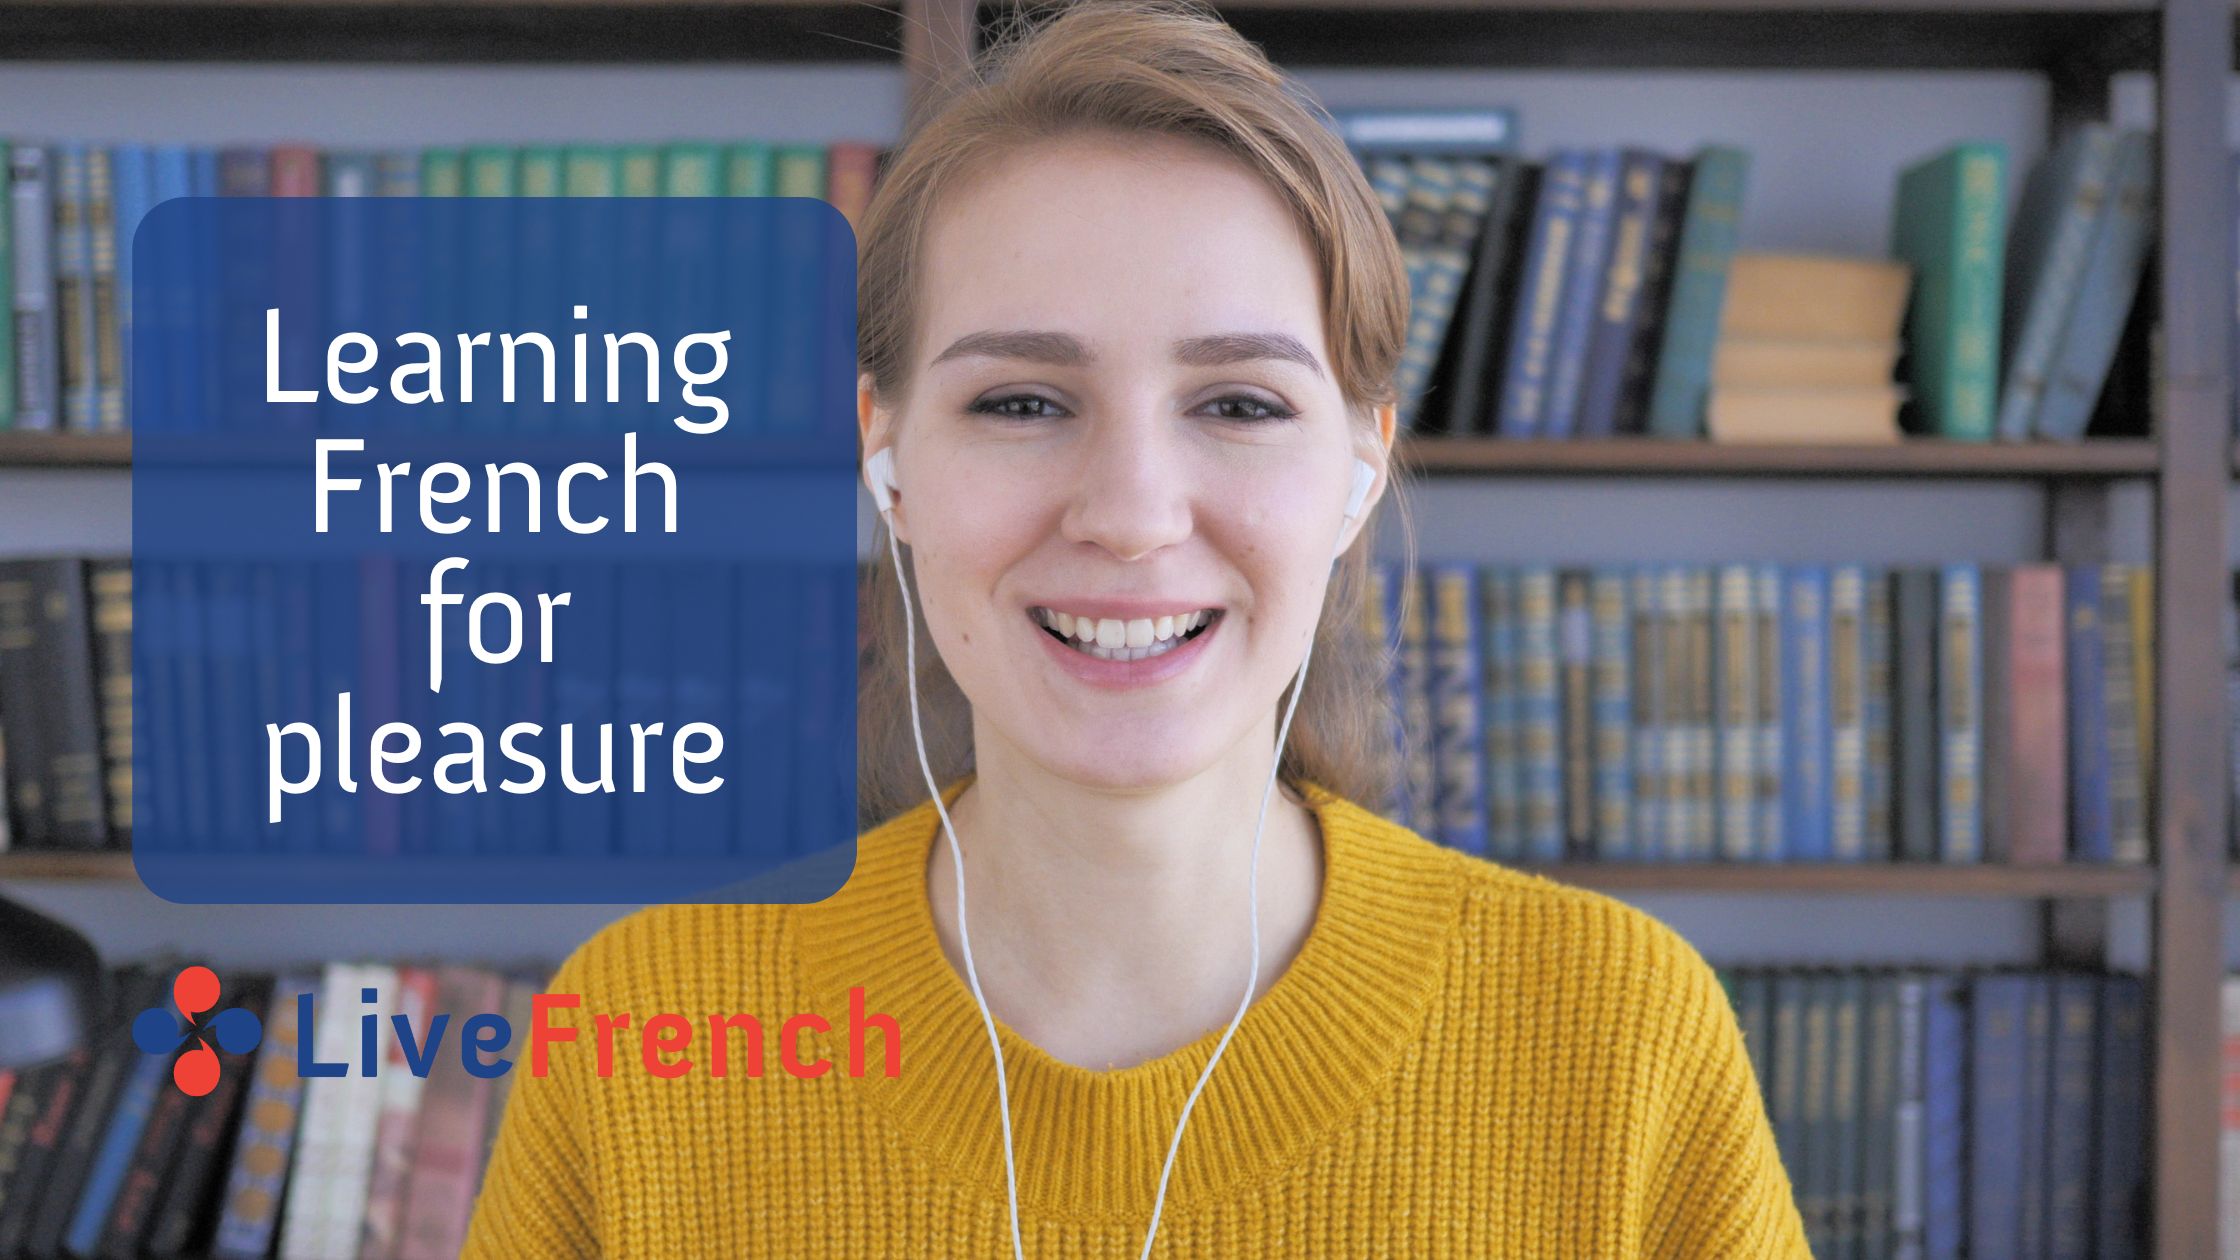 How about taking pleasure in learning French?